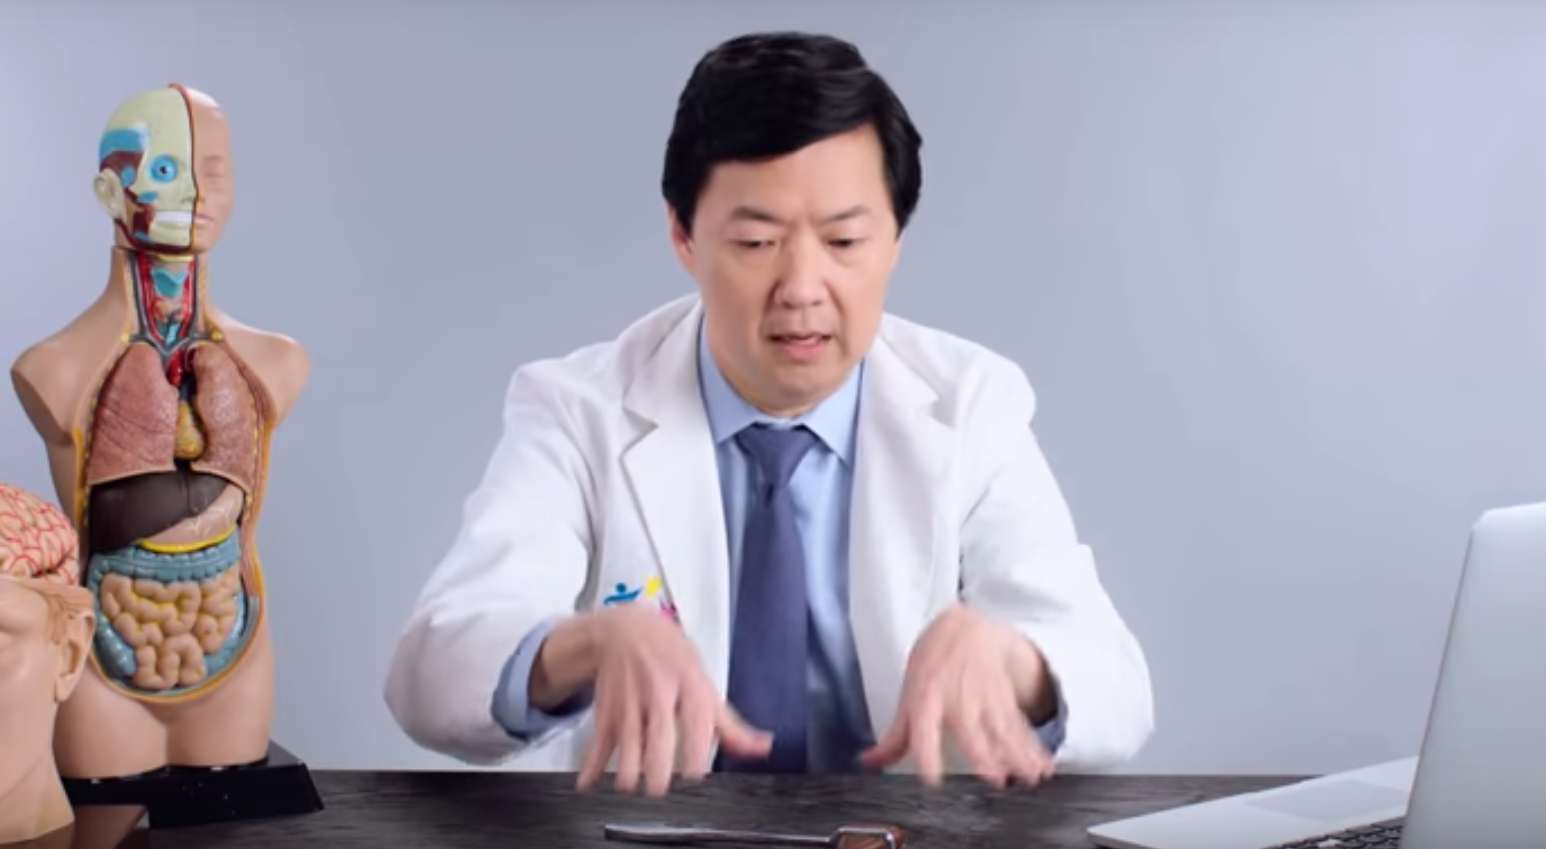 Doctor Ken Jeong Answers Funny Questions